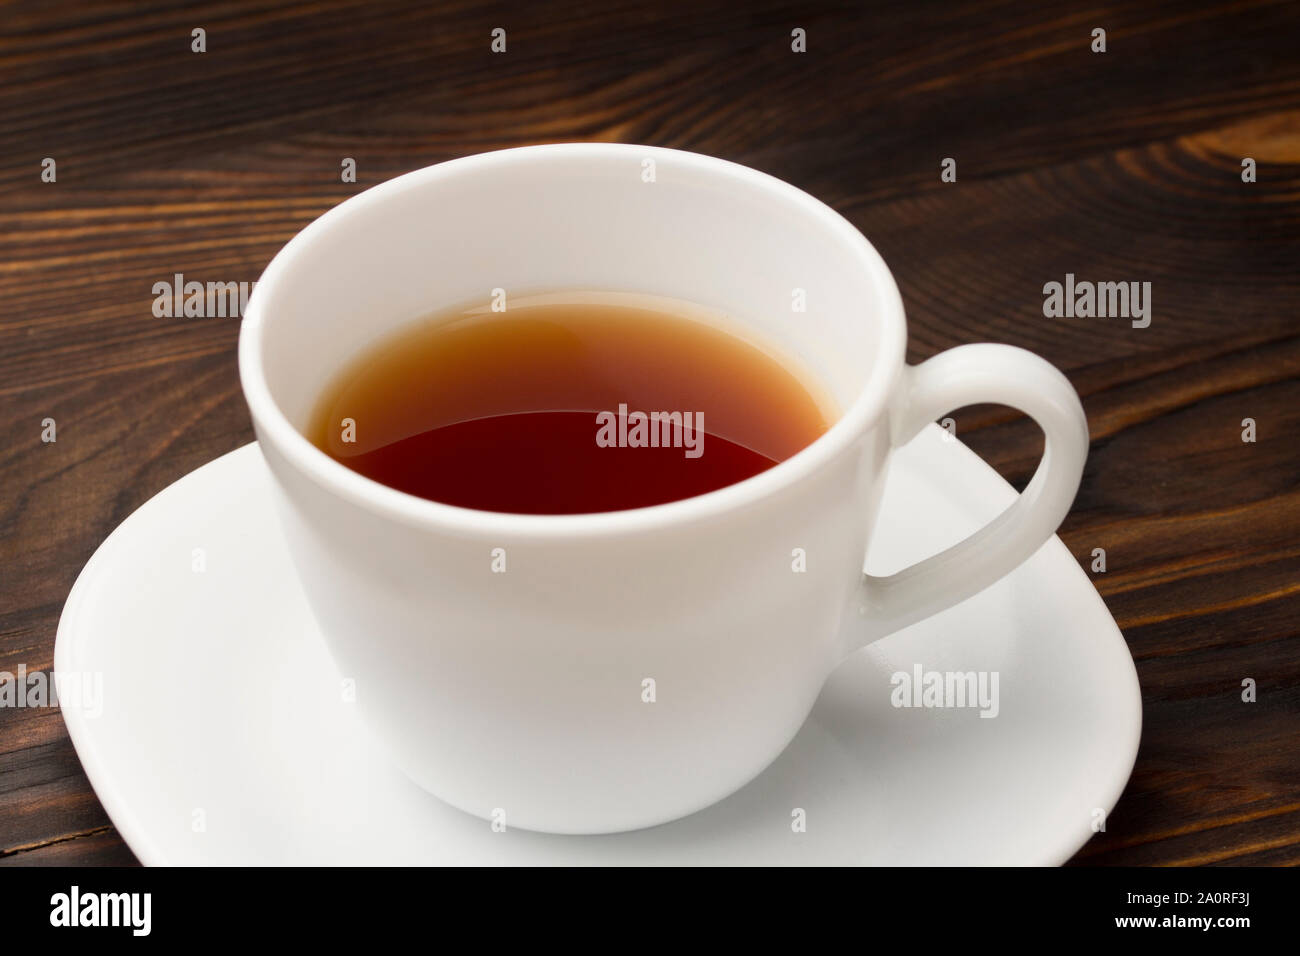 teacup and saucer on old wood texture background. Stock Photo